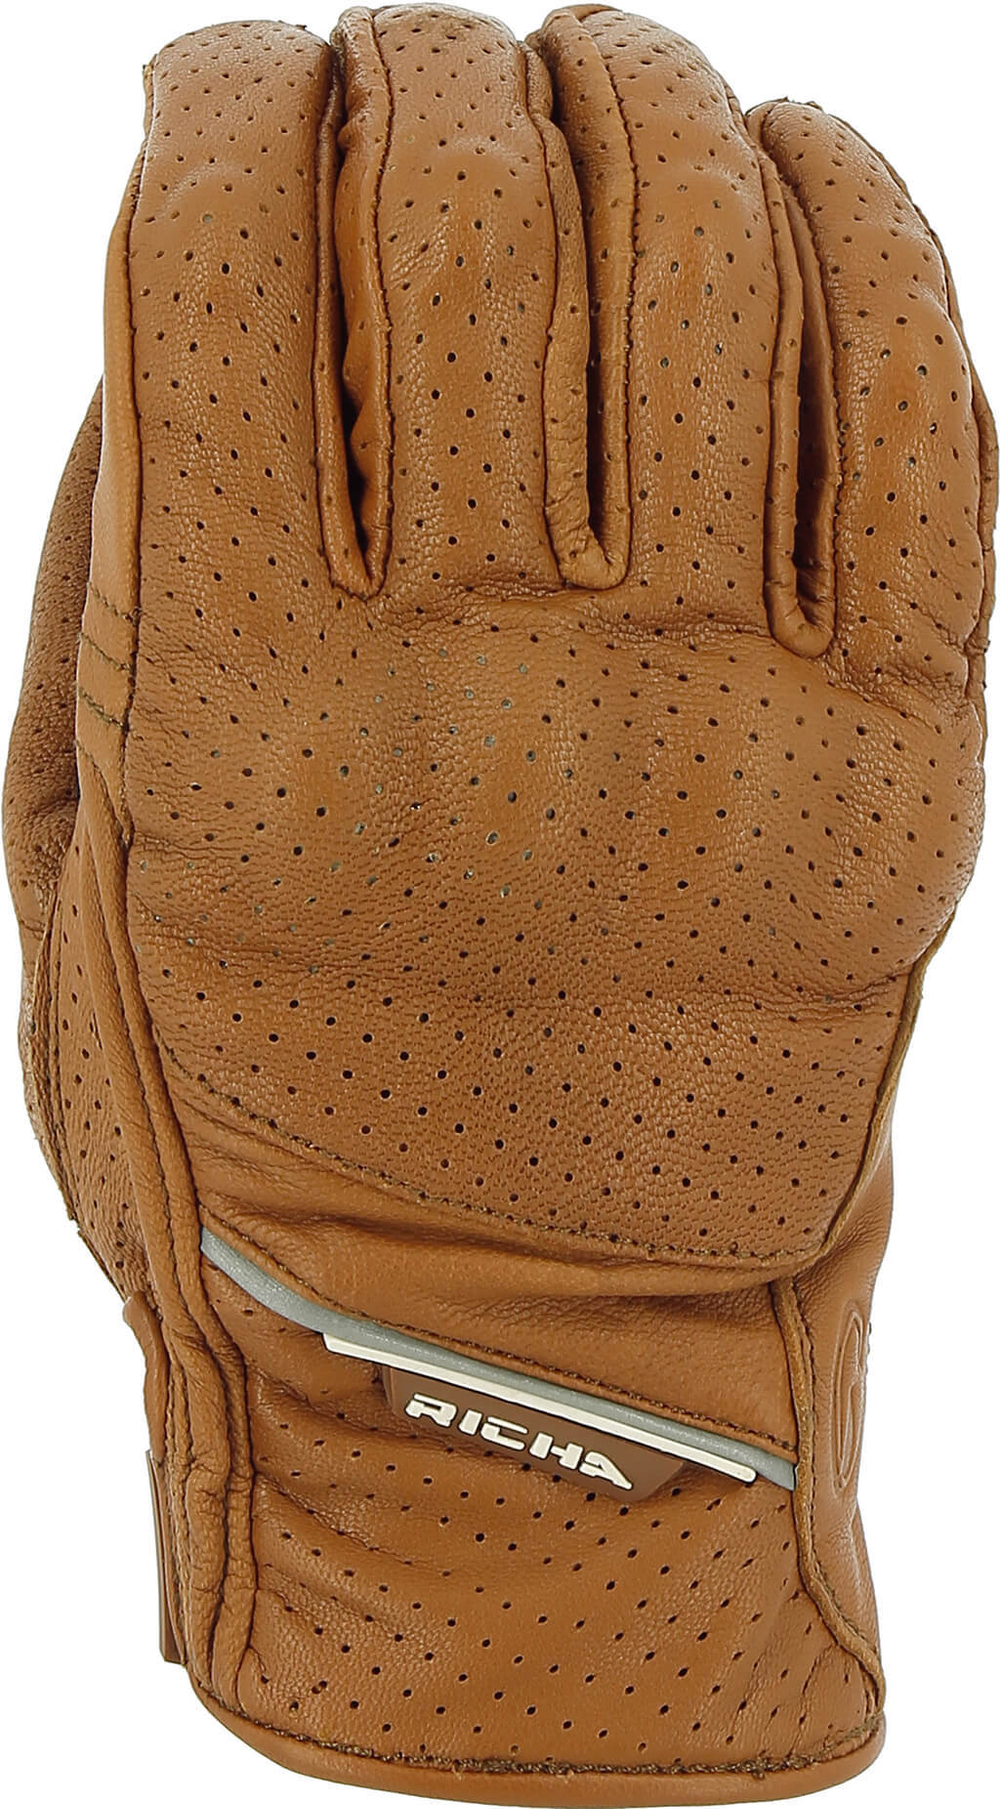 RICHA CRUISER GLOVES Perforated brown